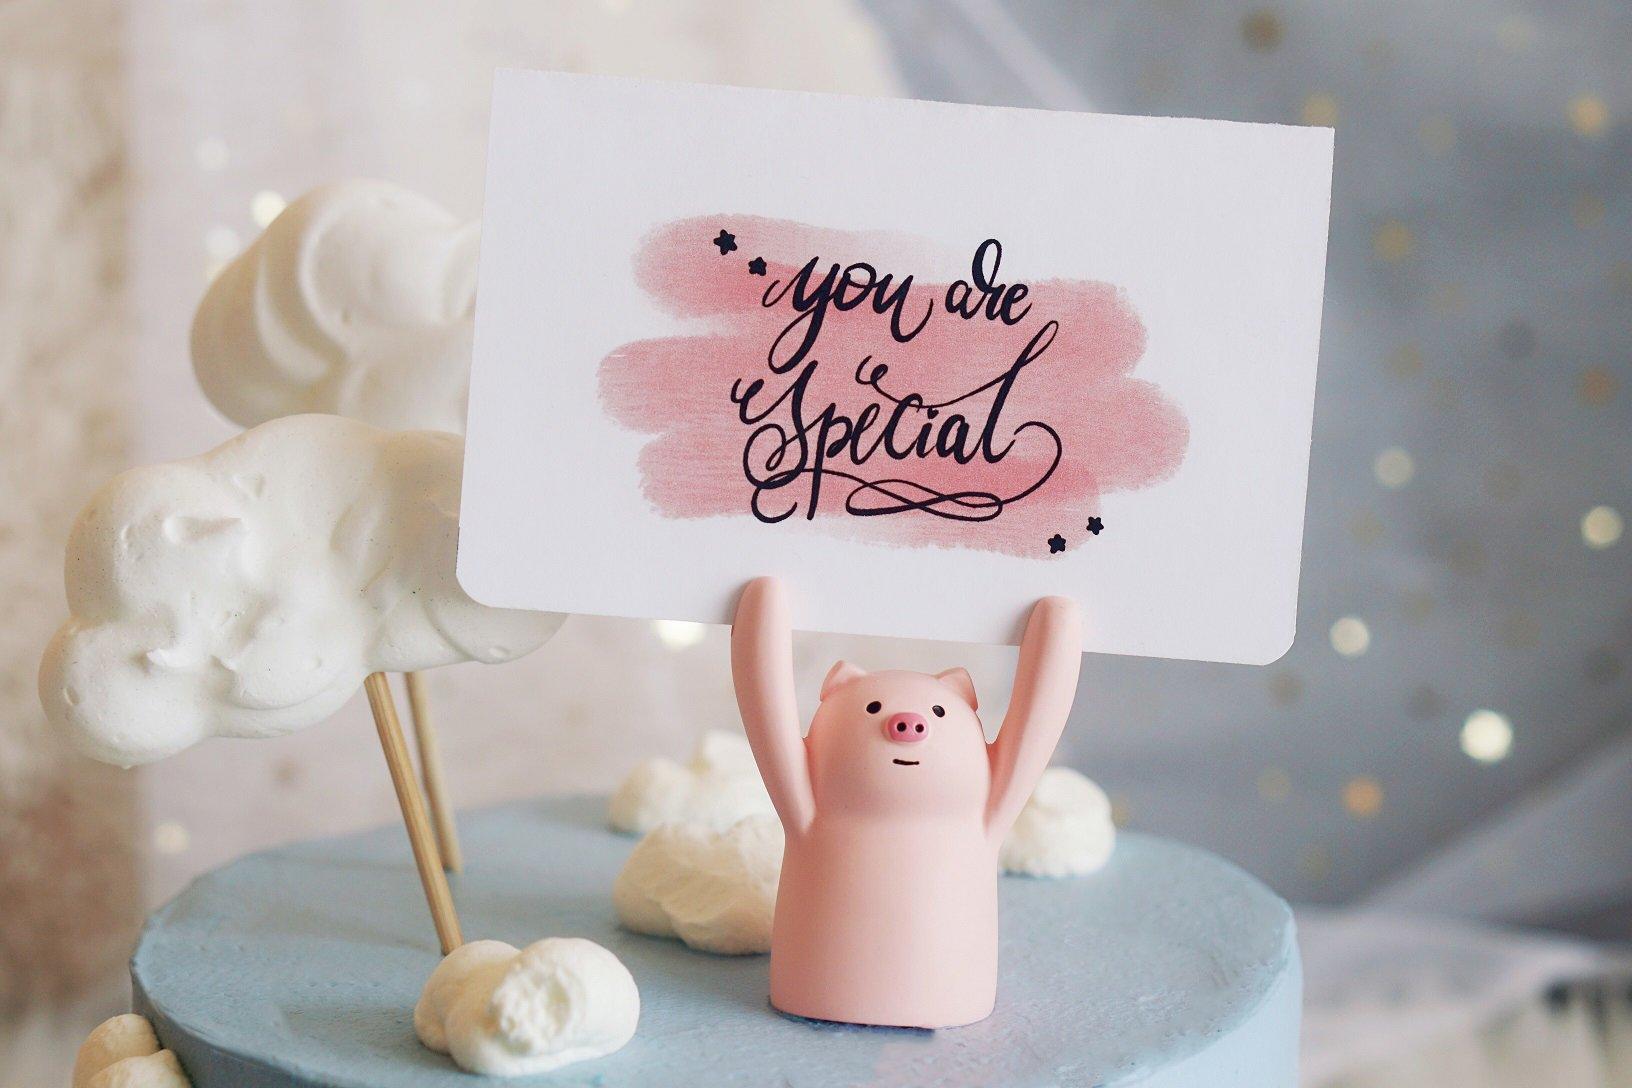 You Are Special - Cake - Dessert - Birthday - Event -The Place Toronto